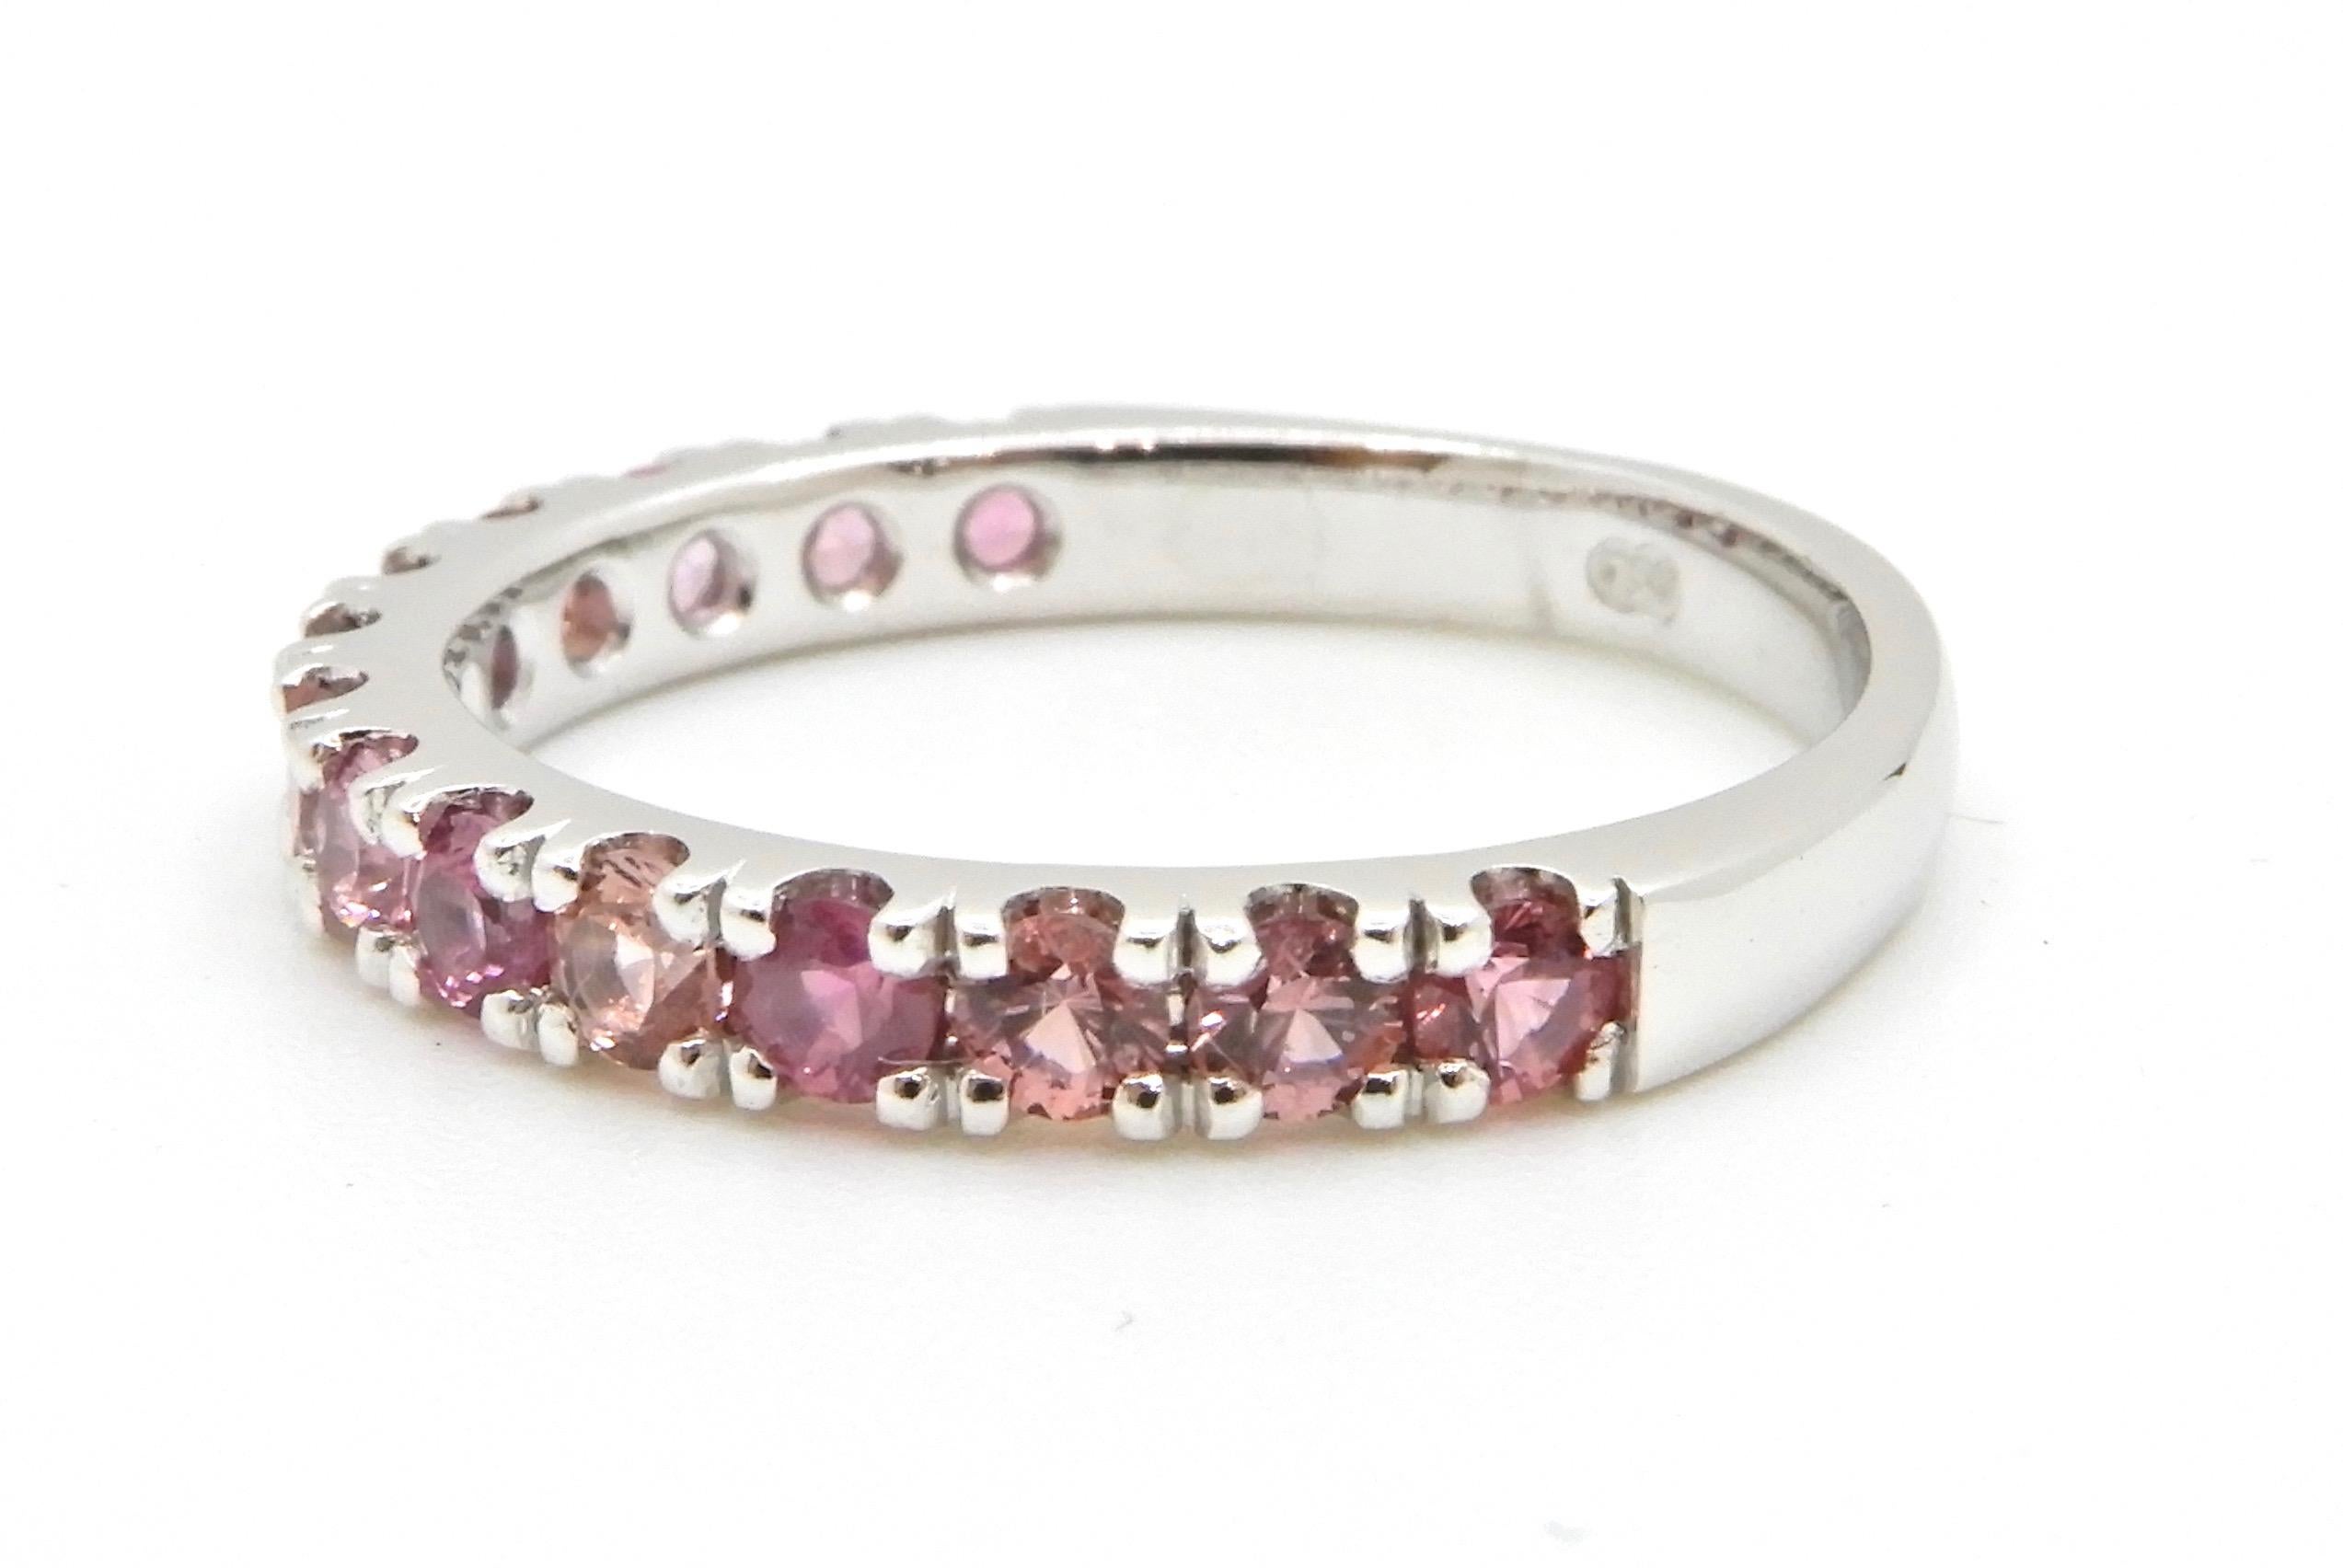 This 0.74 Carat Pink Sapphire and 18 Carat White Gold Wedding Ring is made in the half eternity band style. Set with 14 x 2.5mm round brilliant cut natural, no heat pink sapphires in varying shades.

The design features a wide round, tapered shank